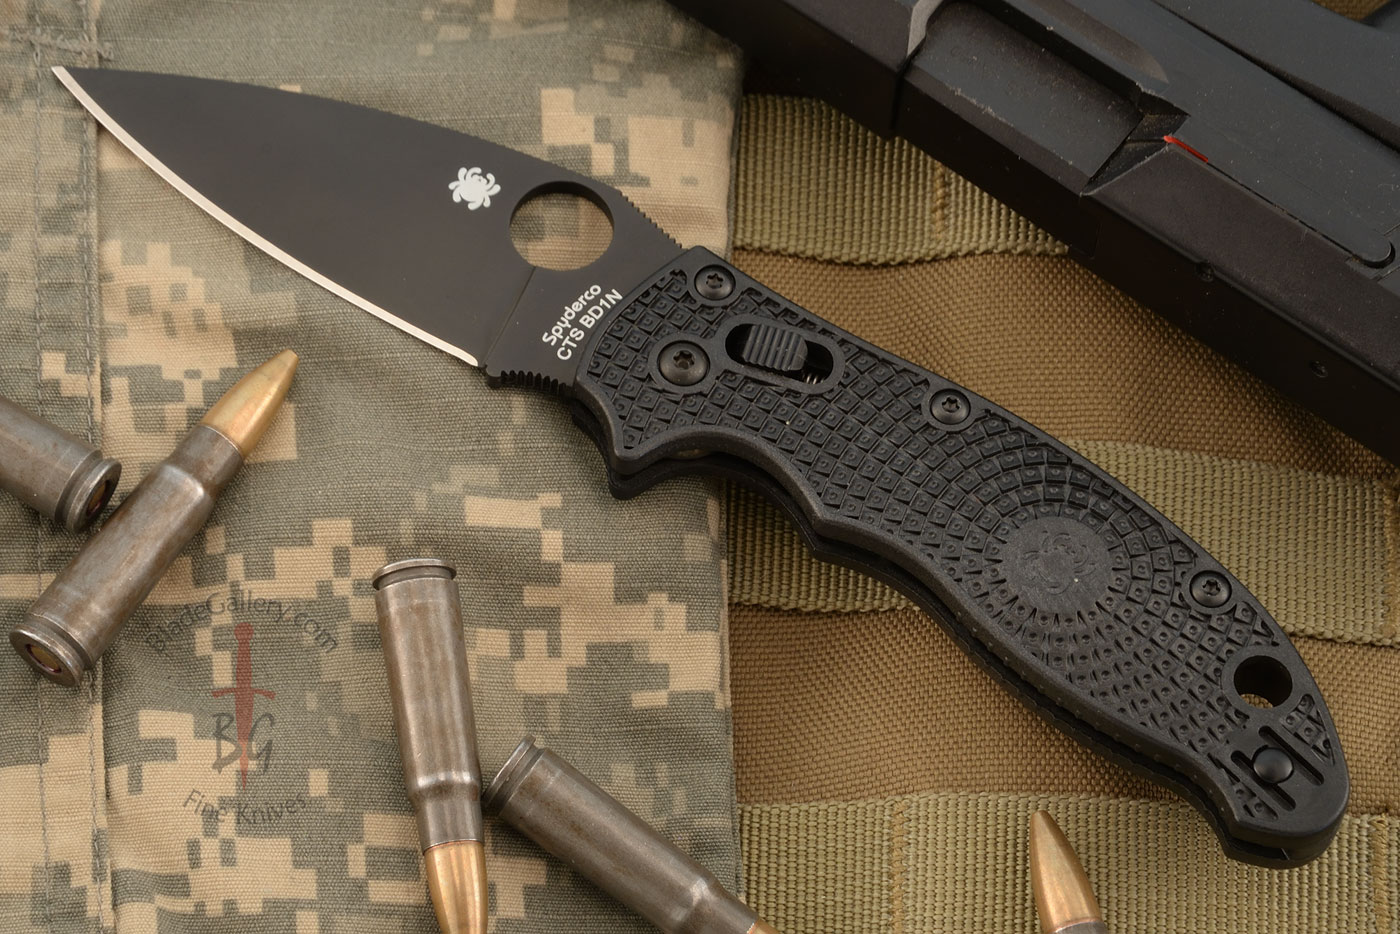 Manix 2 Lightweight with Black FRCP and Black CTS-BD1N (C101PBBK2)